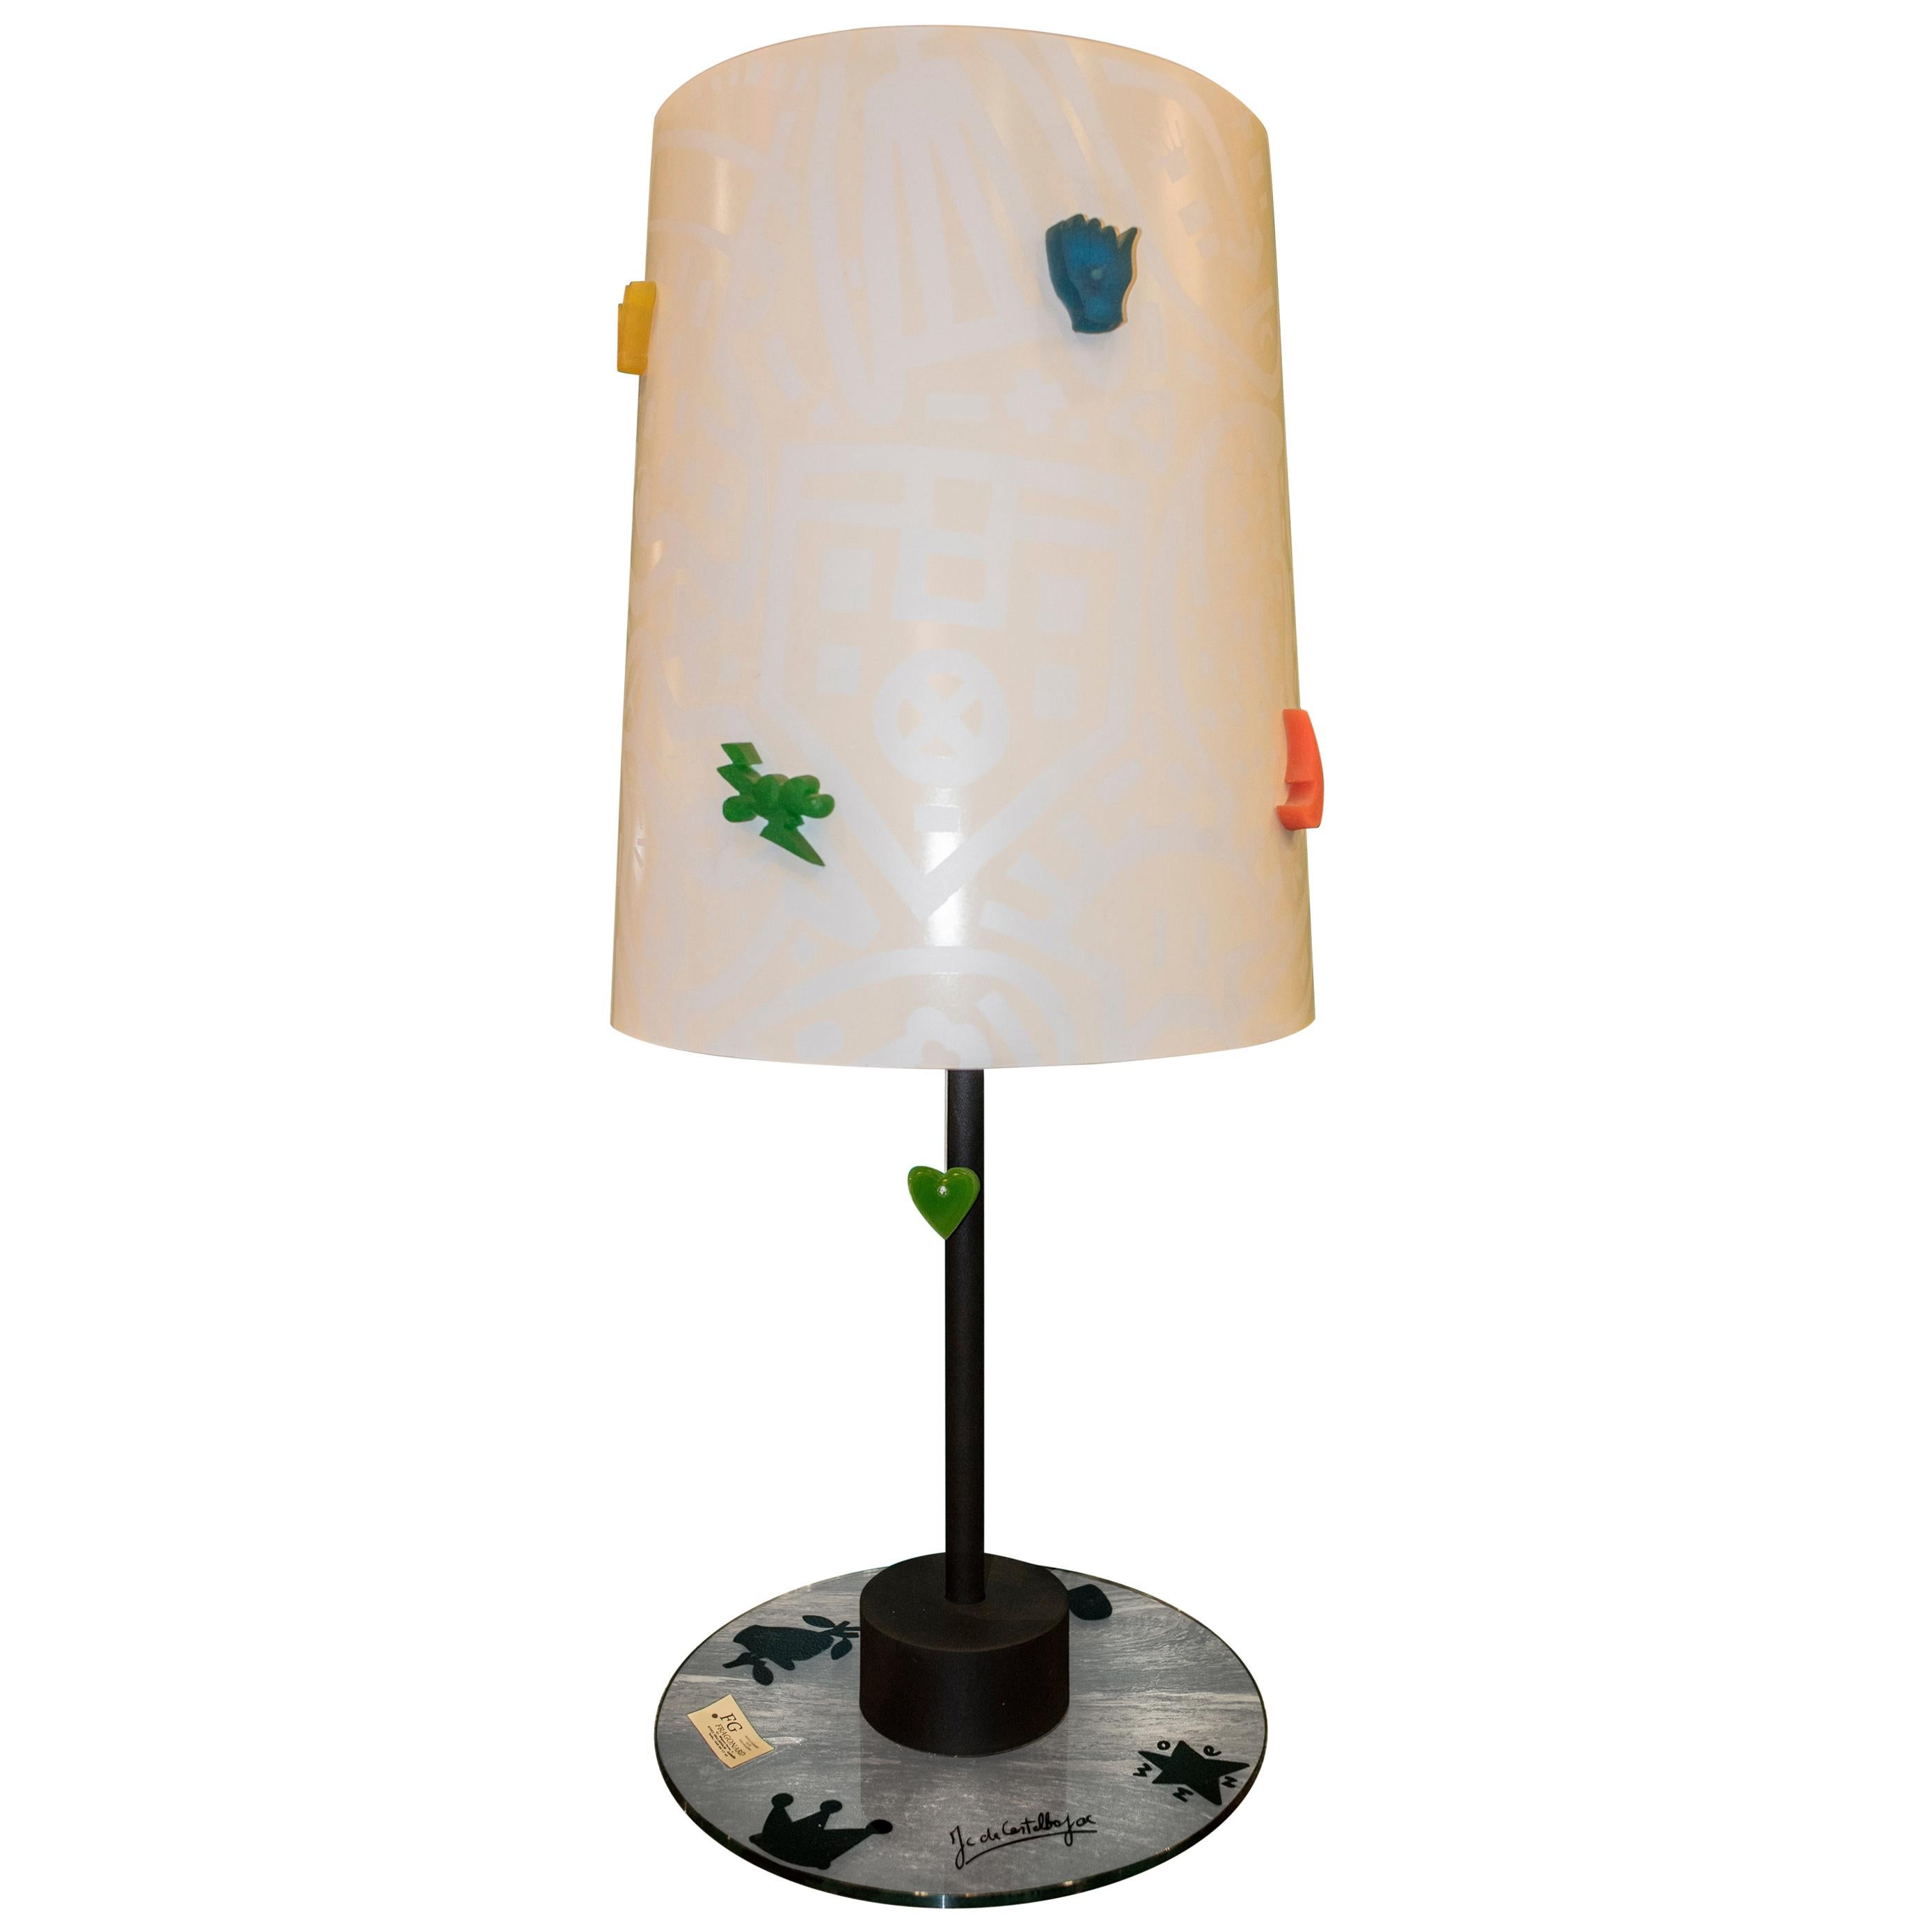 J.Charles Castelbajac Table Lamp with Diferentescolors and Patterns of Stars